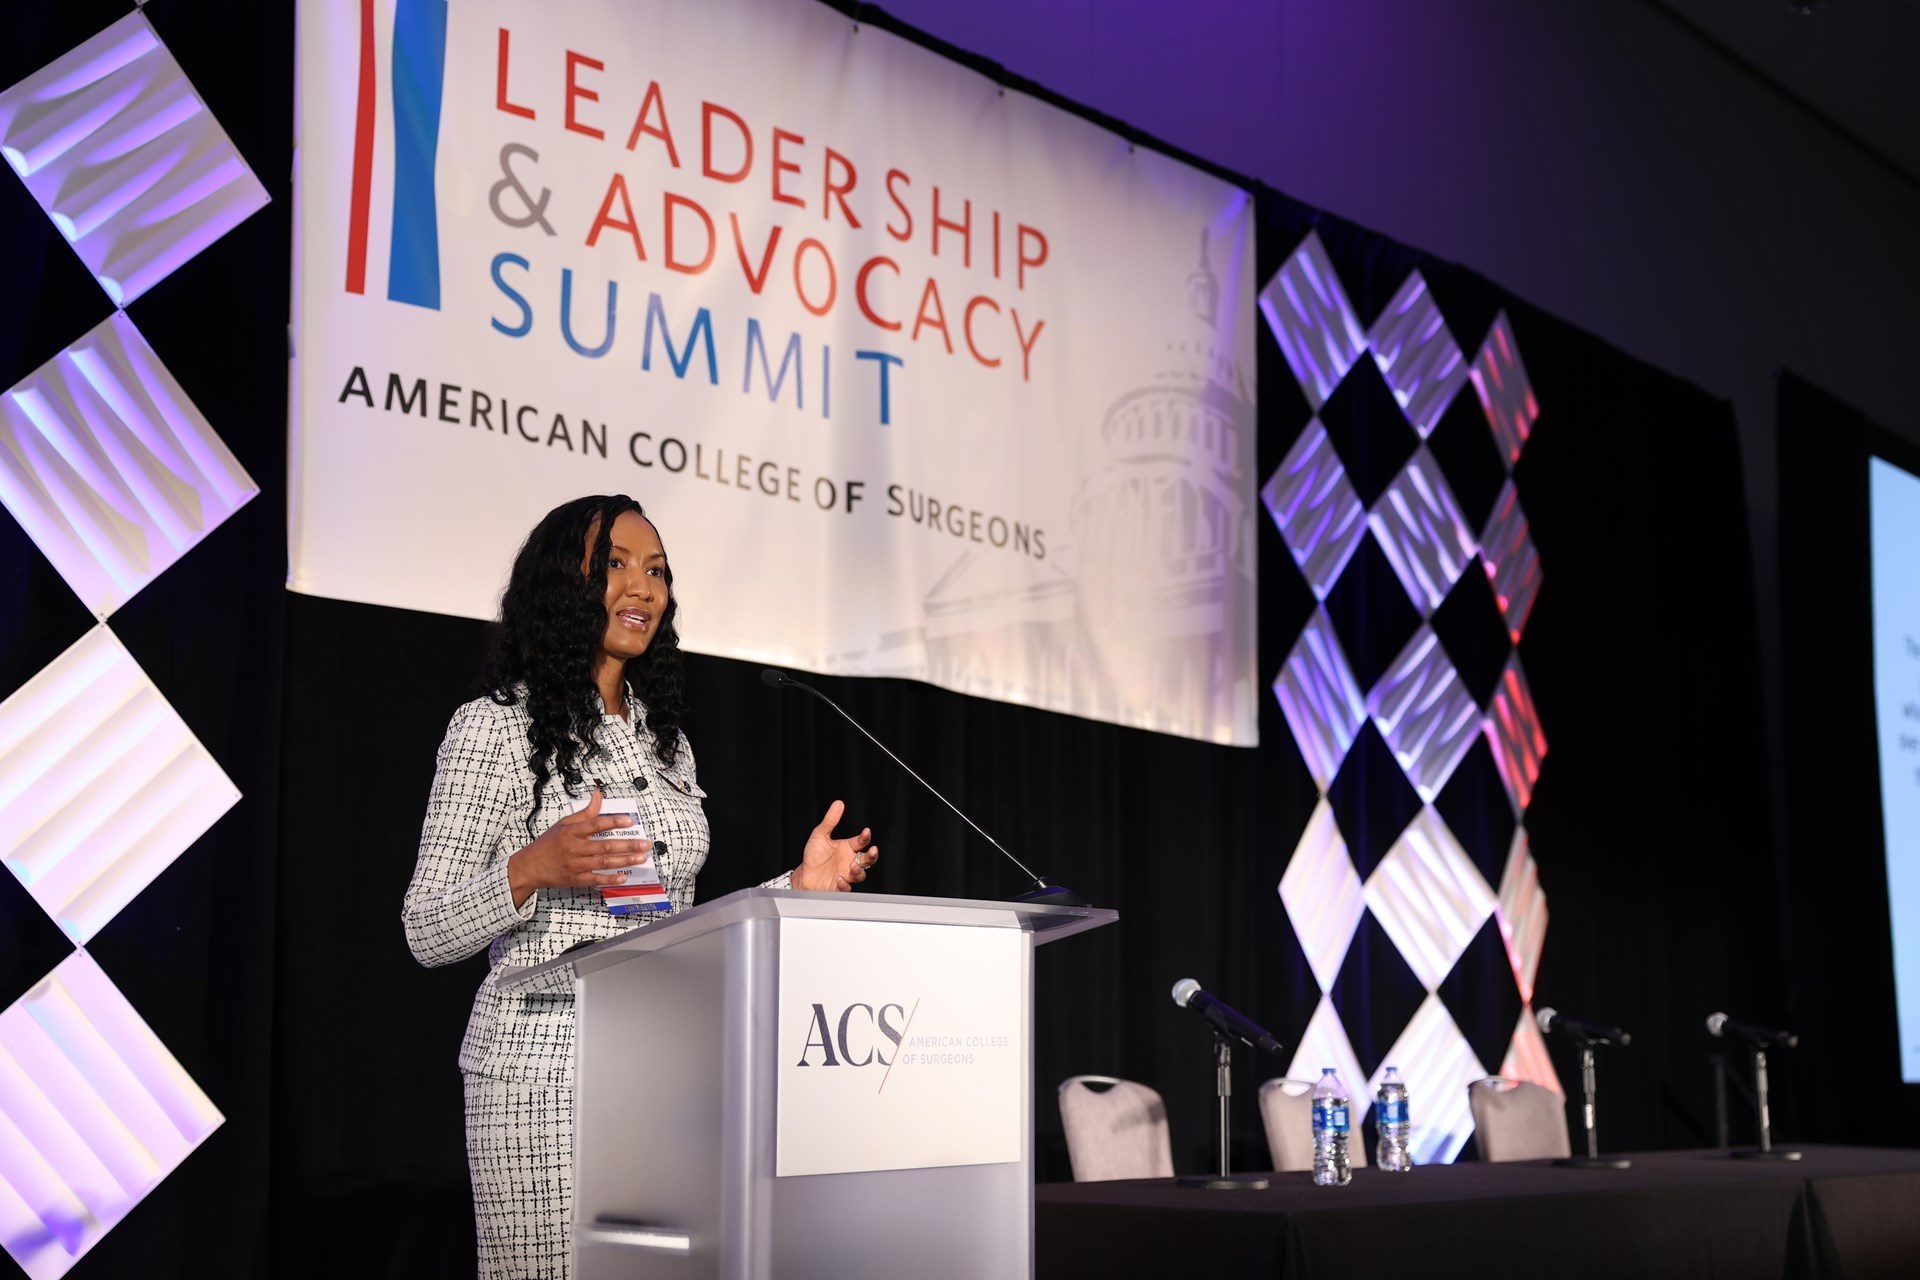 ACS Members Can Watch 2022 ACS Leadership Summit Content for FREE and Earn CME